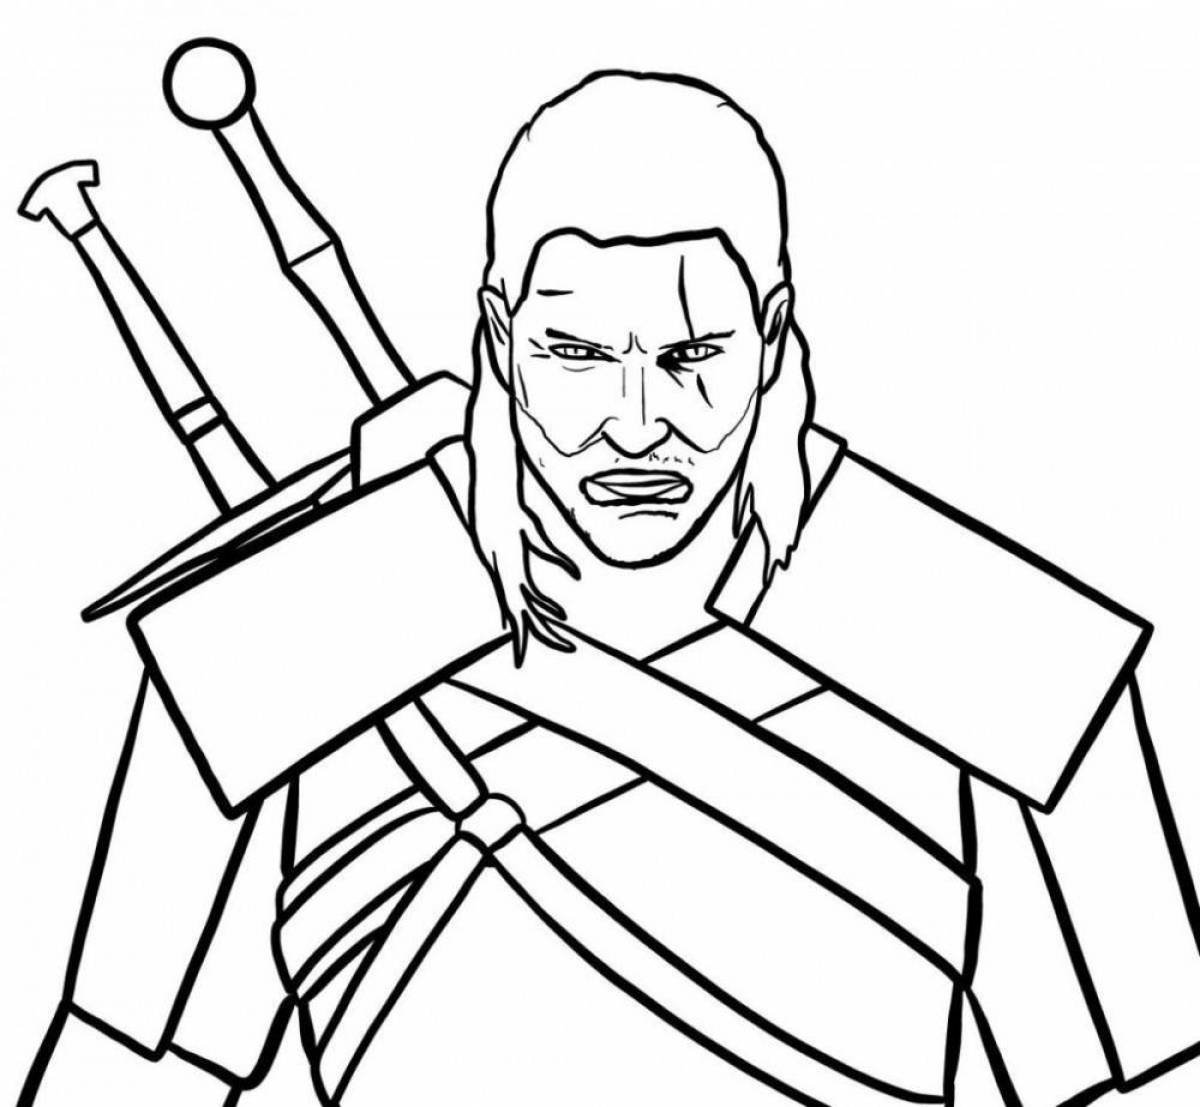 Great Witcher coloring book